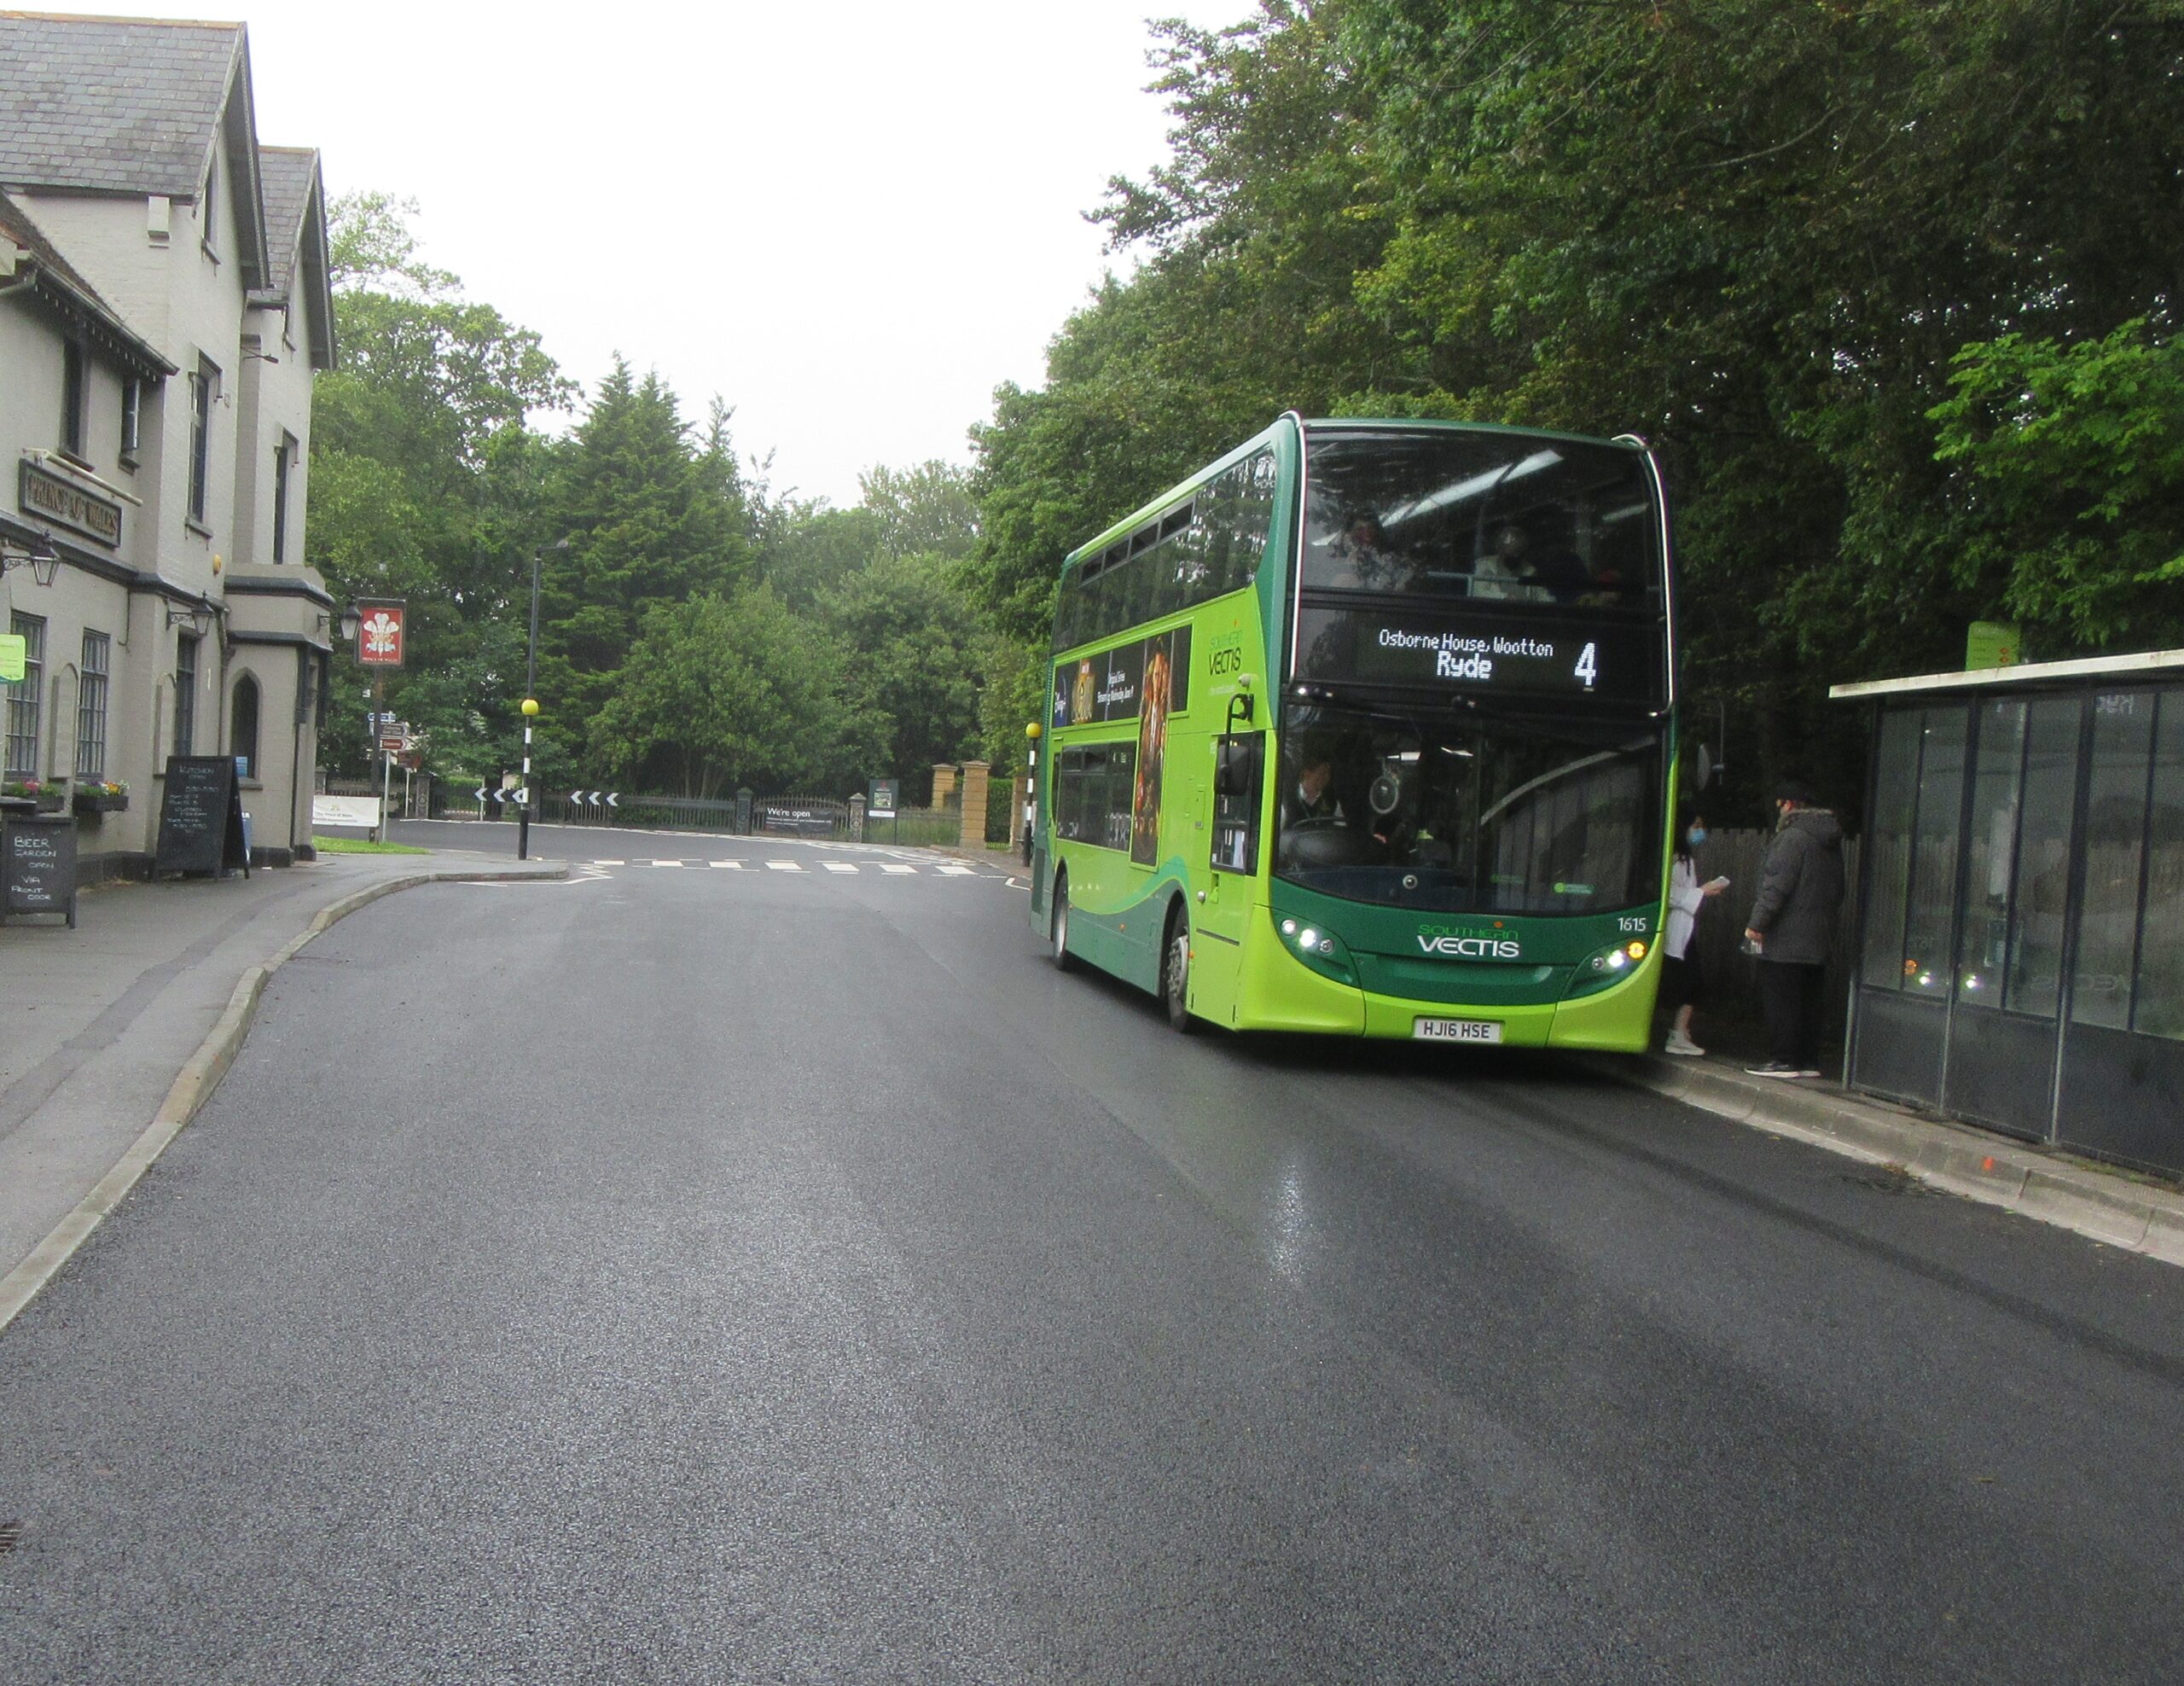 Photo showing the resurfaced road in York Avenue outside the garage on the approach to Osborne House in East Cowes. Bus on the right hand side at the bus stop.